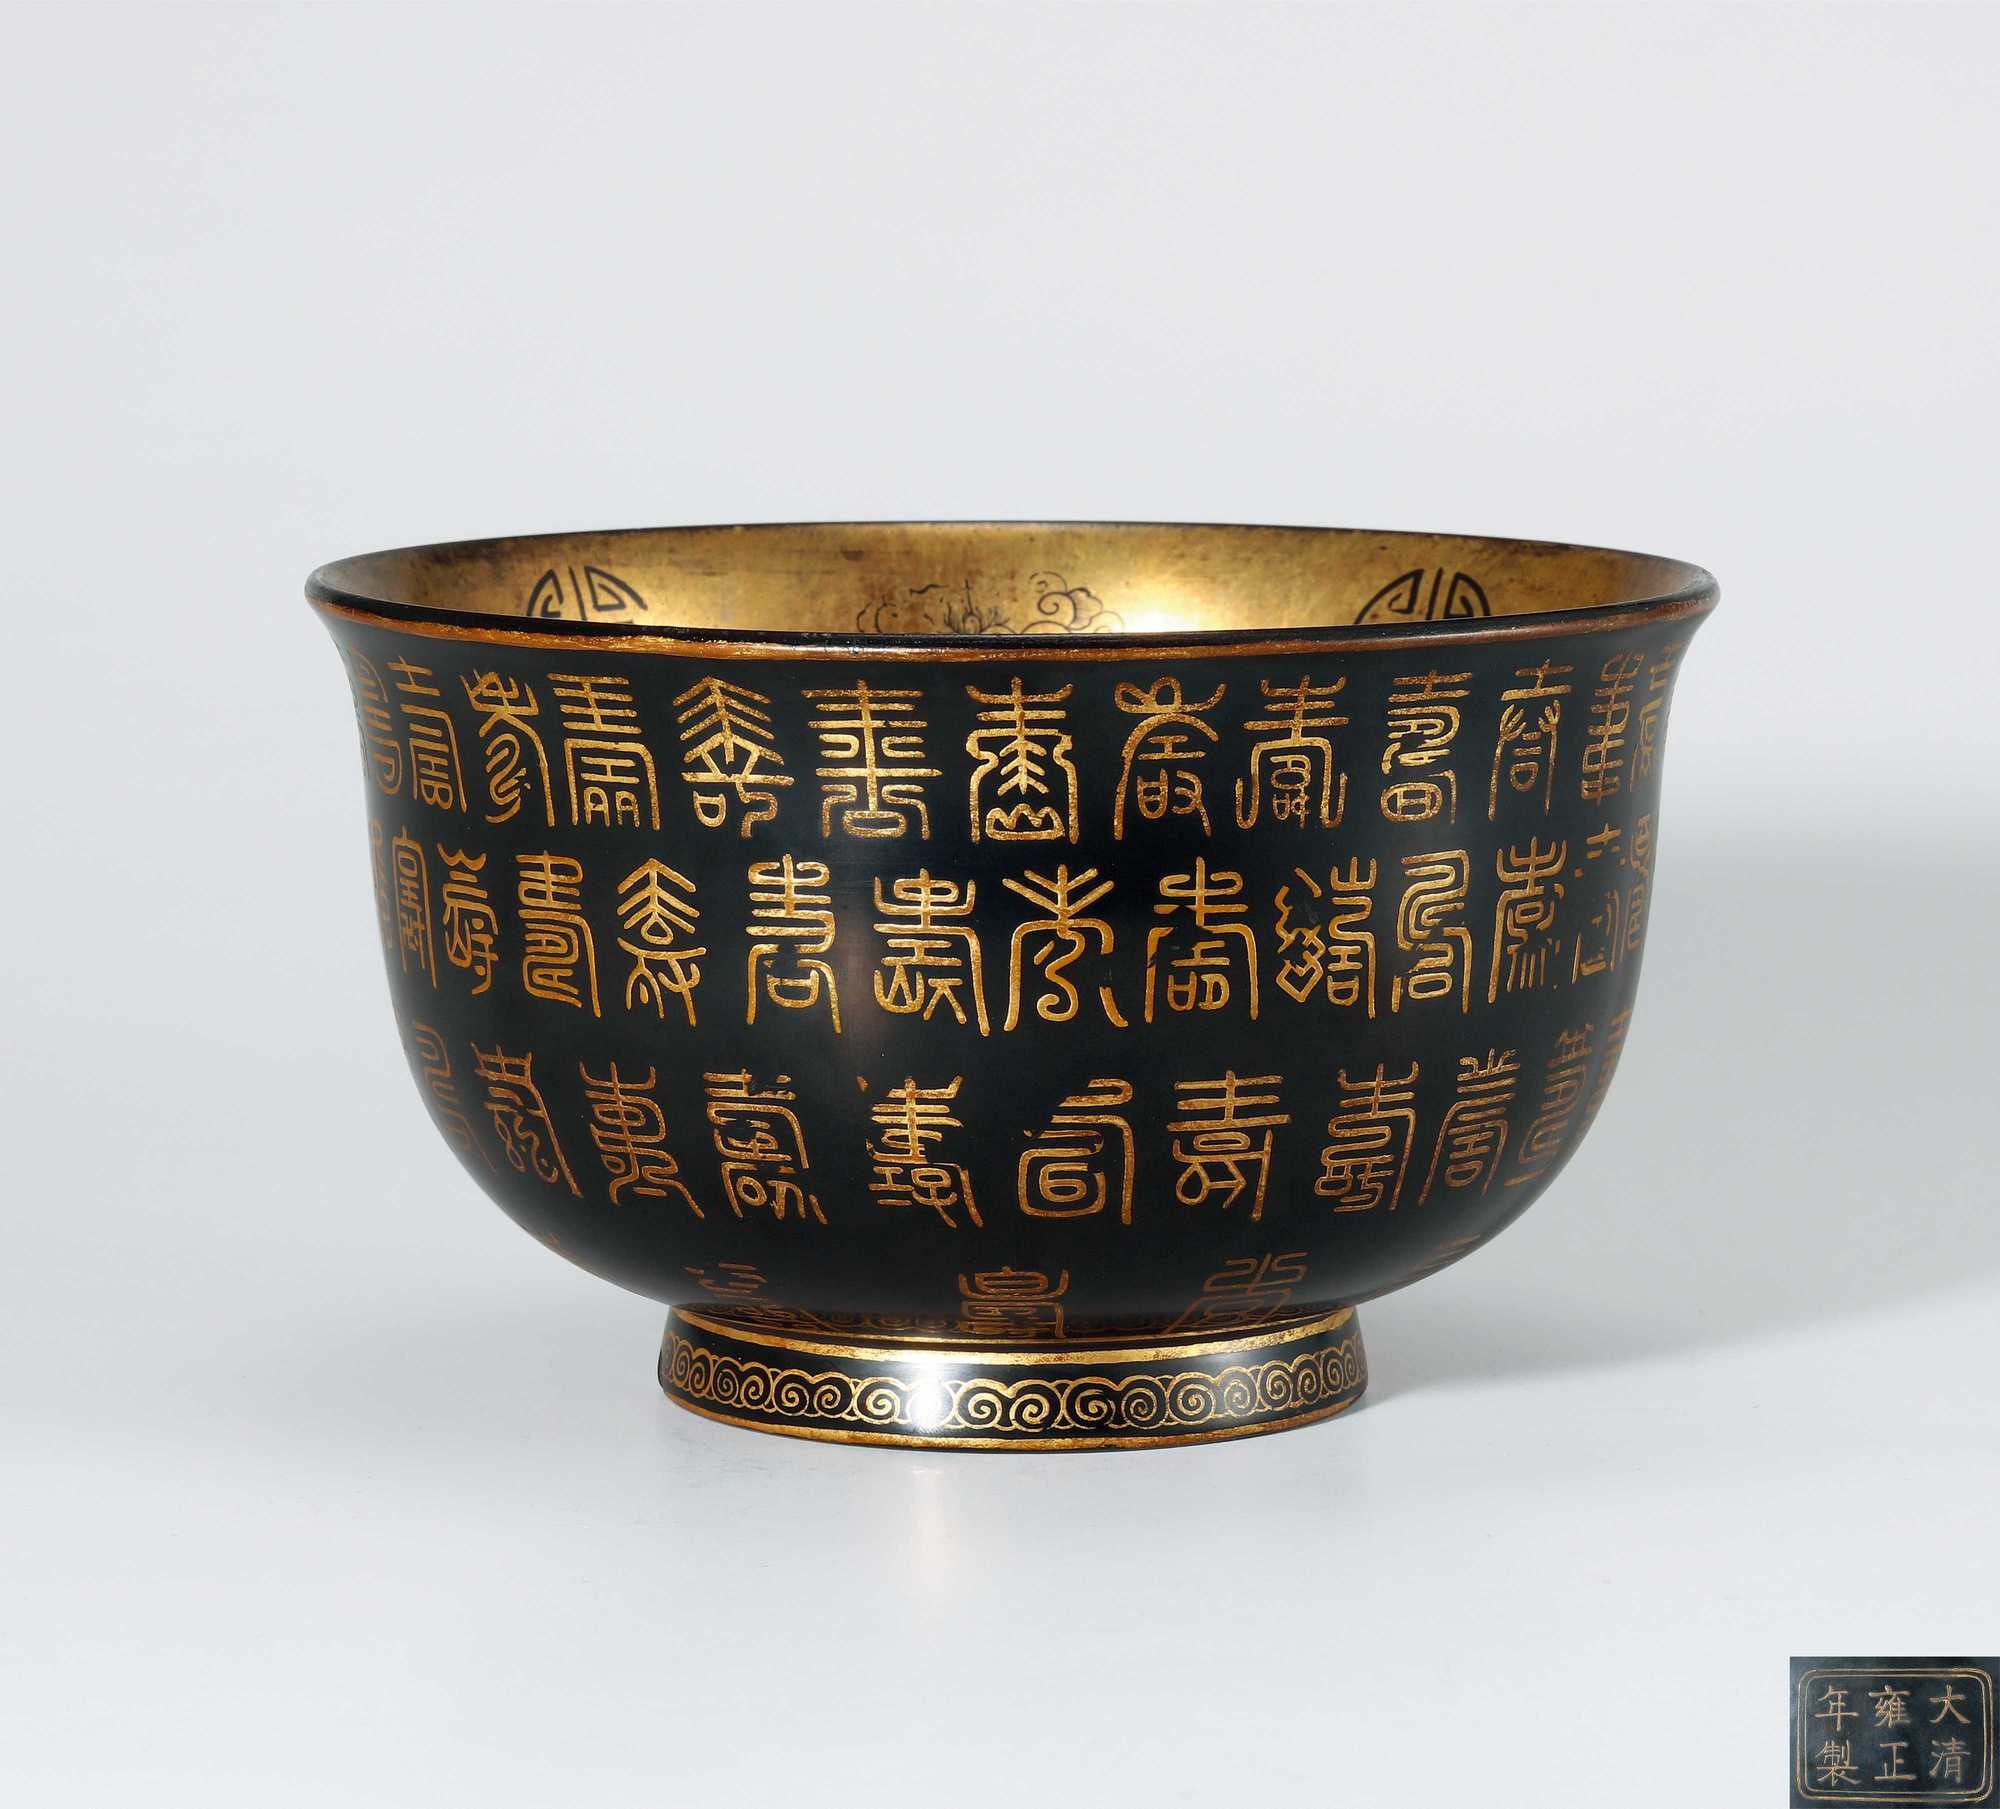 A BLACK-LACQUERED WITH GILDING‘LONGEVITY’ BOWL